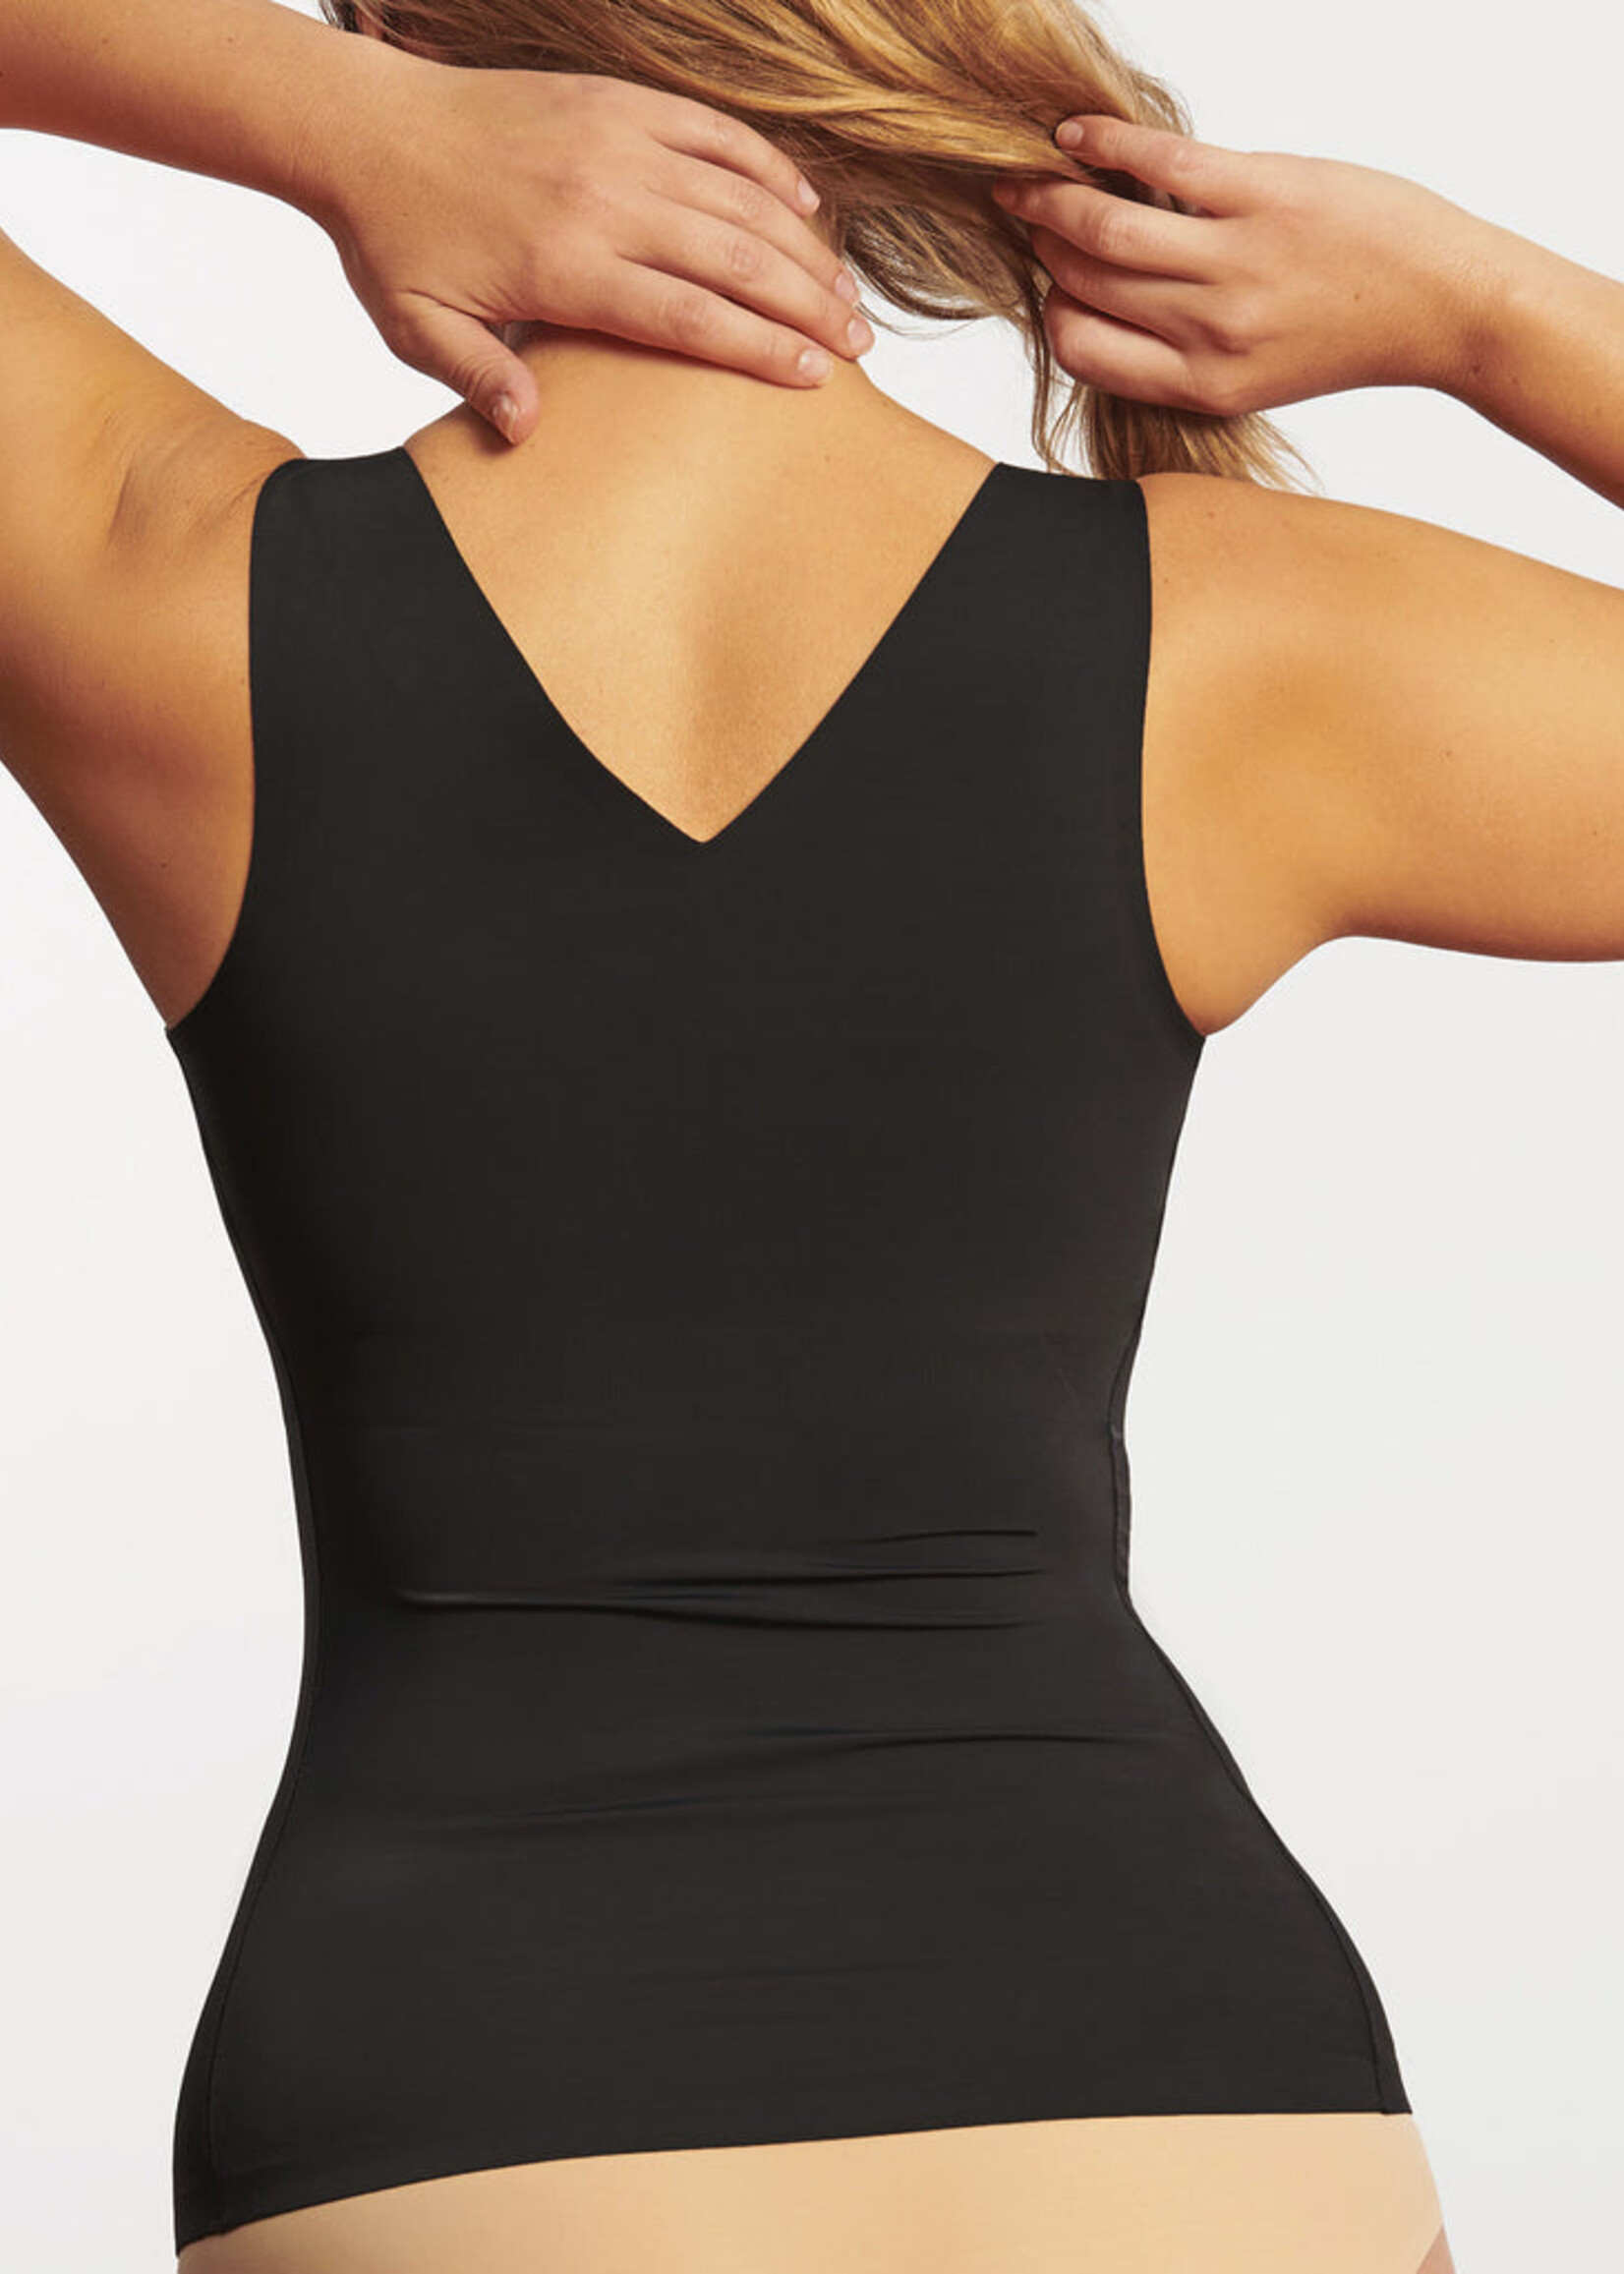 Evelyn & Bobbie The Smoothing Cami